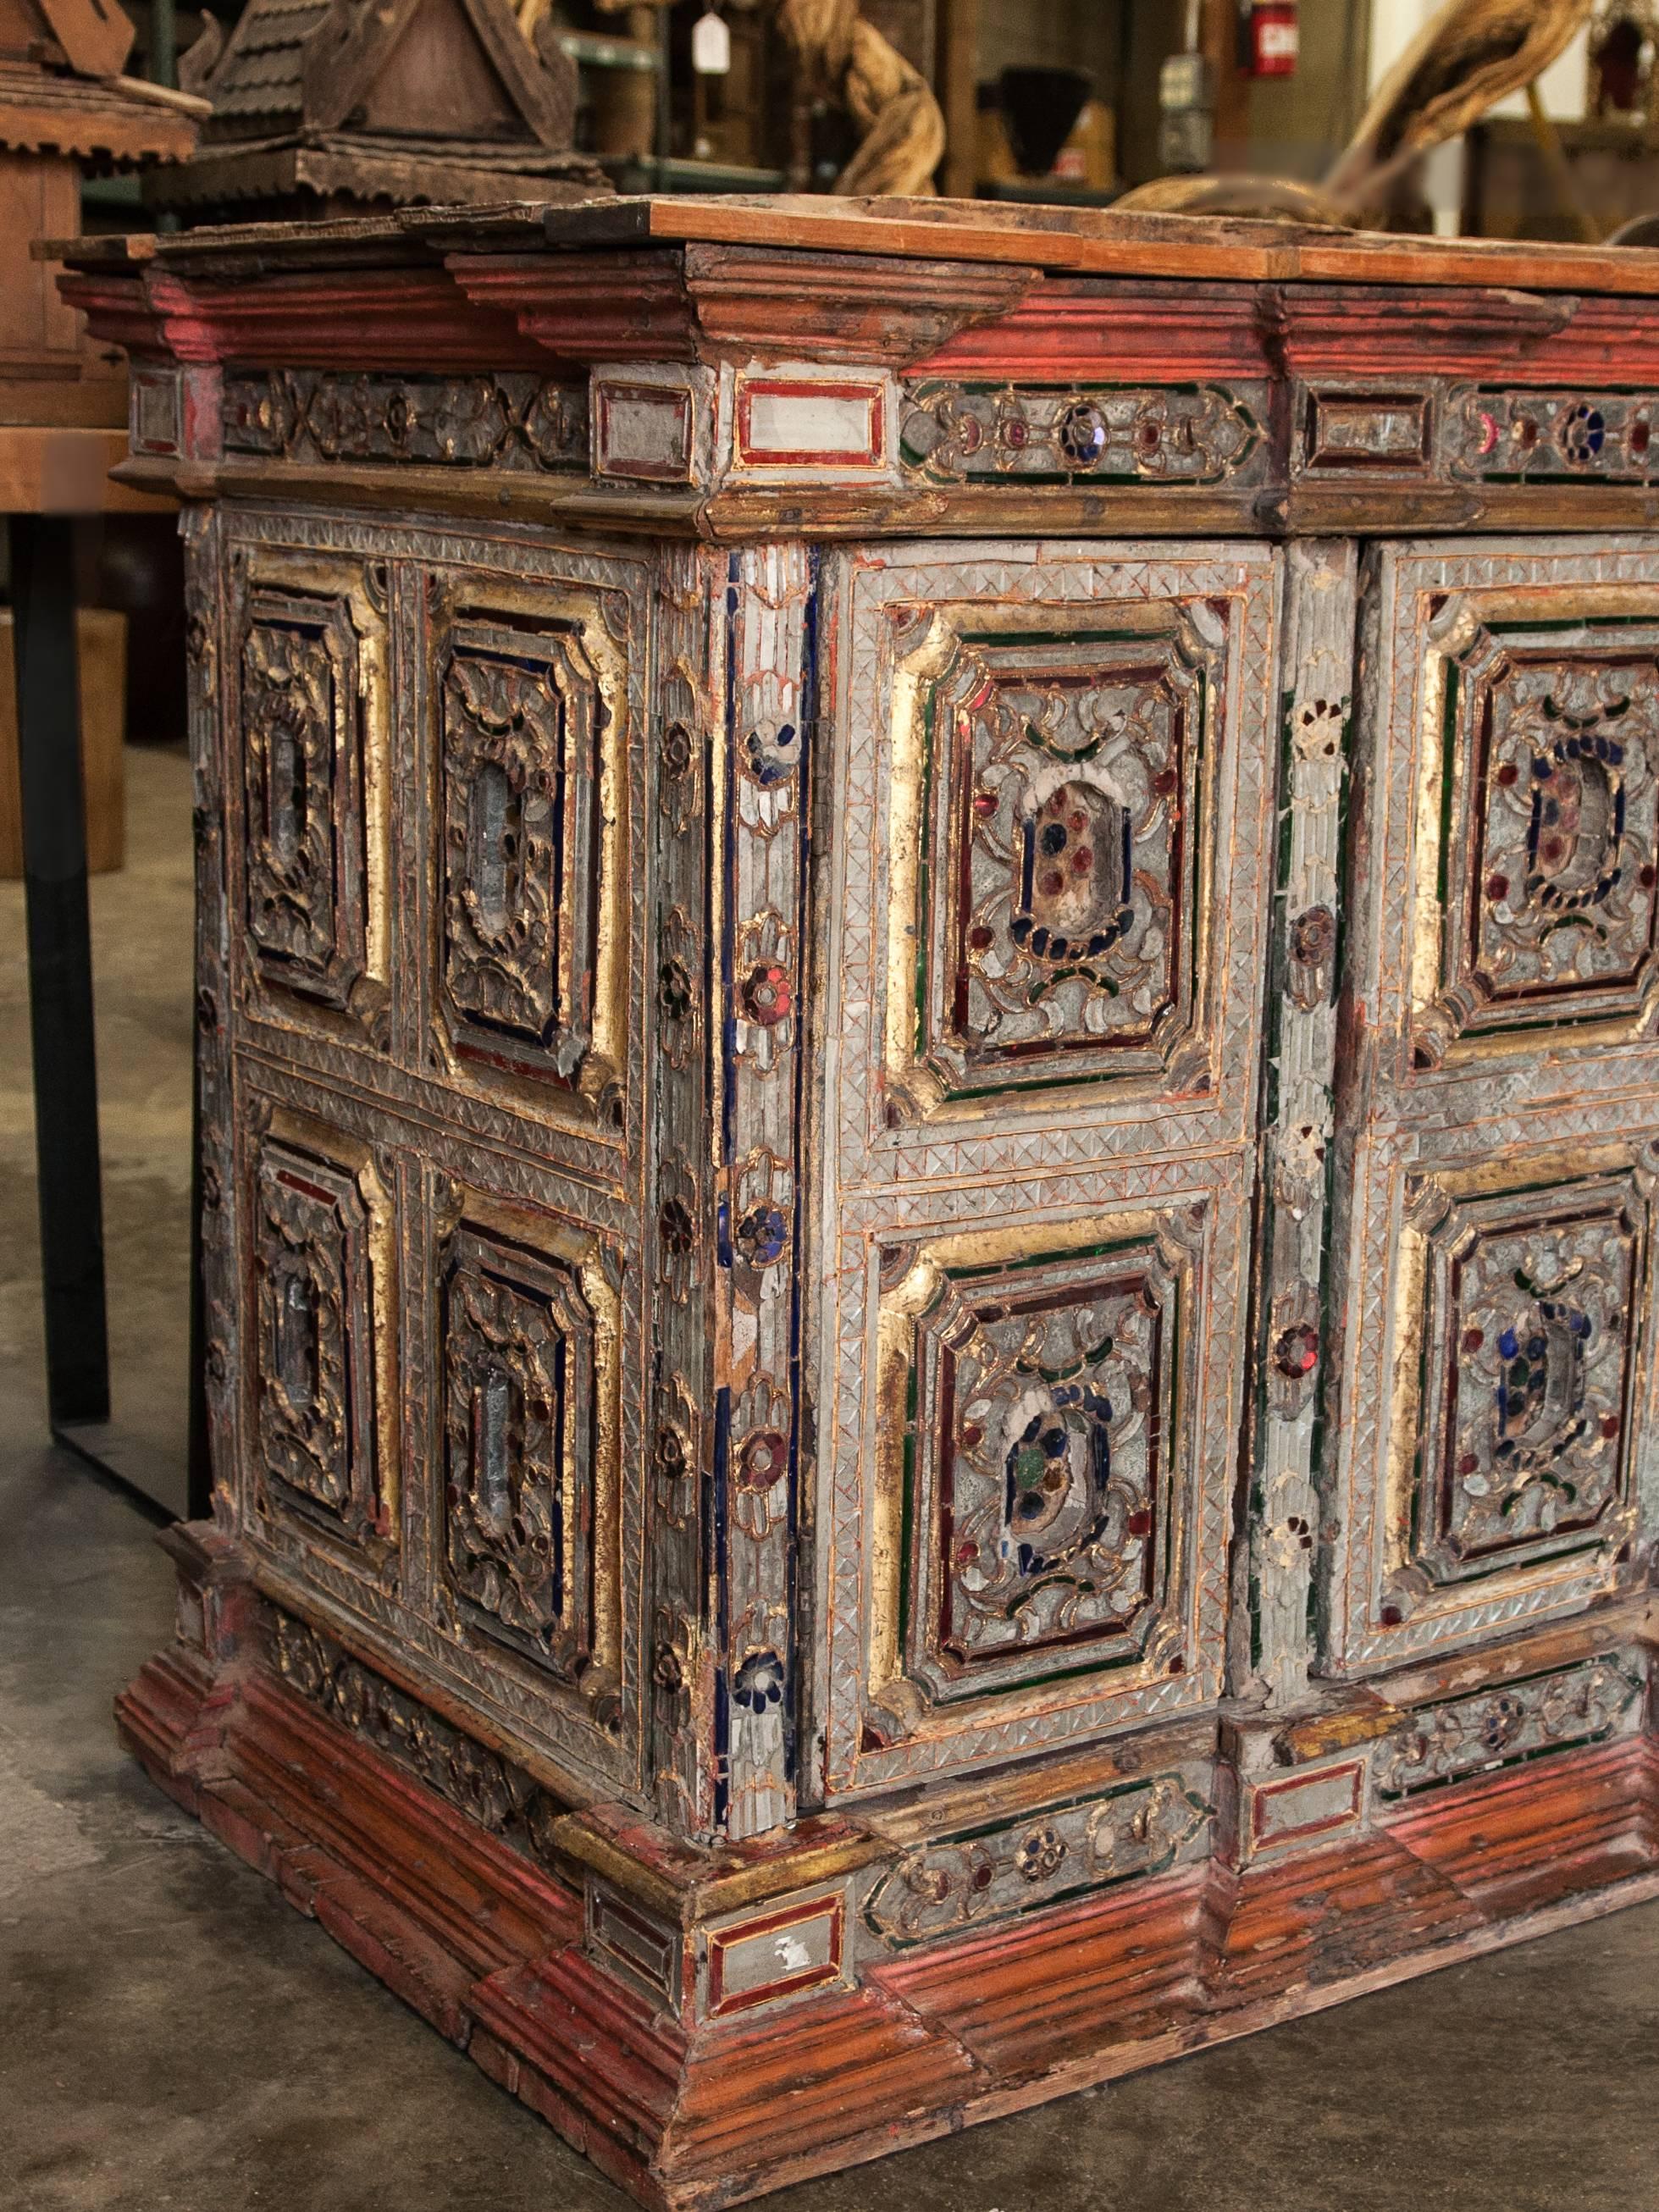 Buddhist teak scripture cabinet from Burma with inlay glass, early 20th century.
This scripture cabinet would have also served as a base for a religious statue or object, and to store religious texts and objects.
Dimensions: 37 inches wide by 27